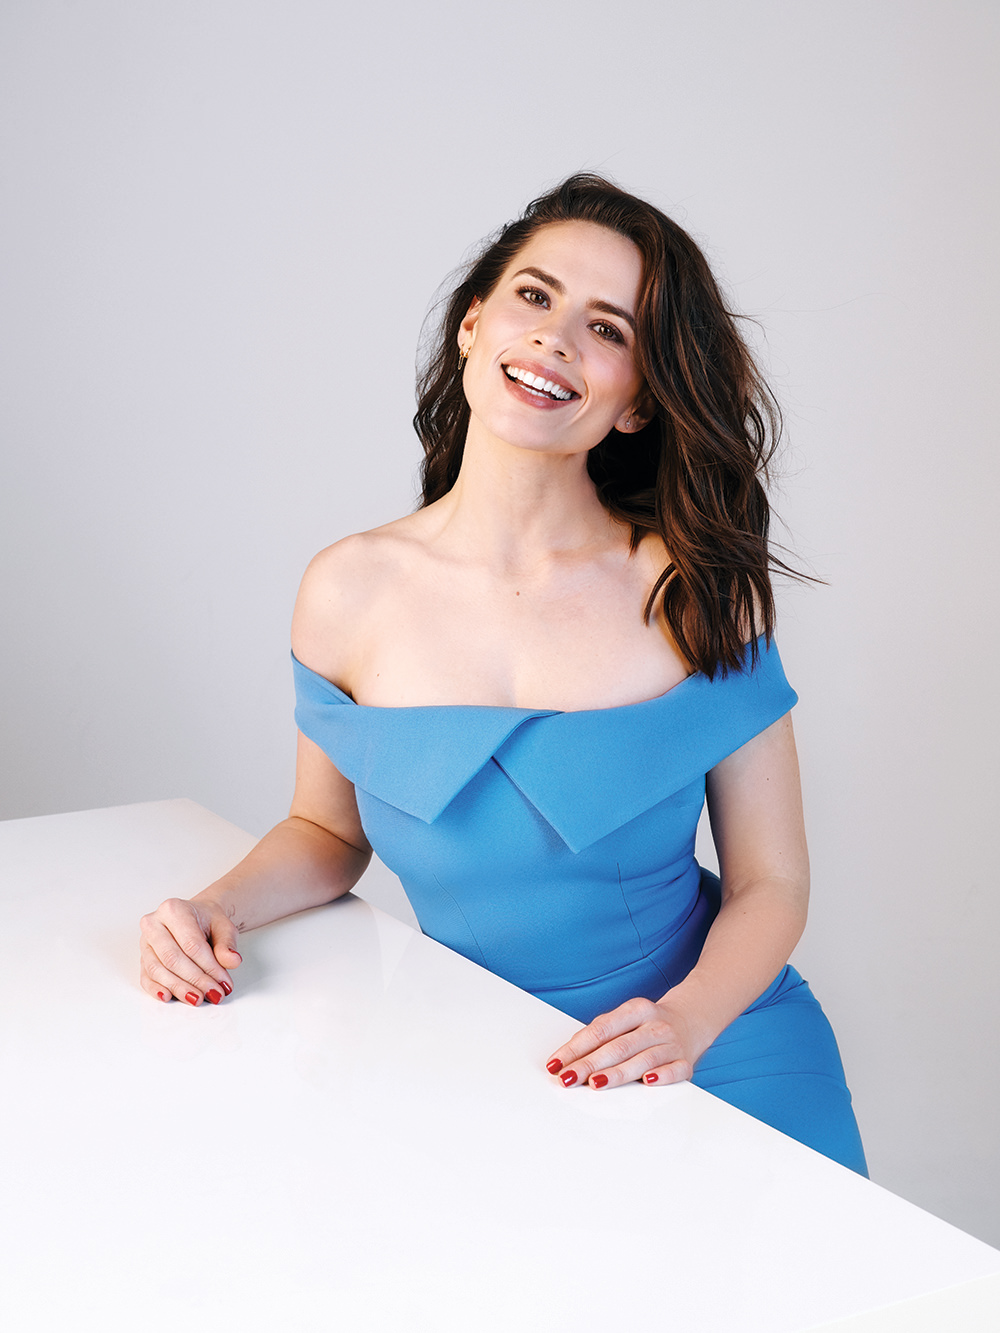 Hayley Atwell - Hayley Atwell Variety - HD Wallpaper 